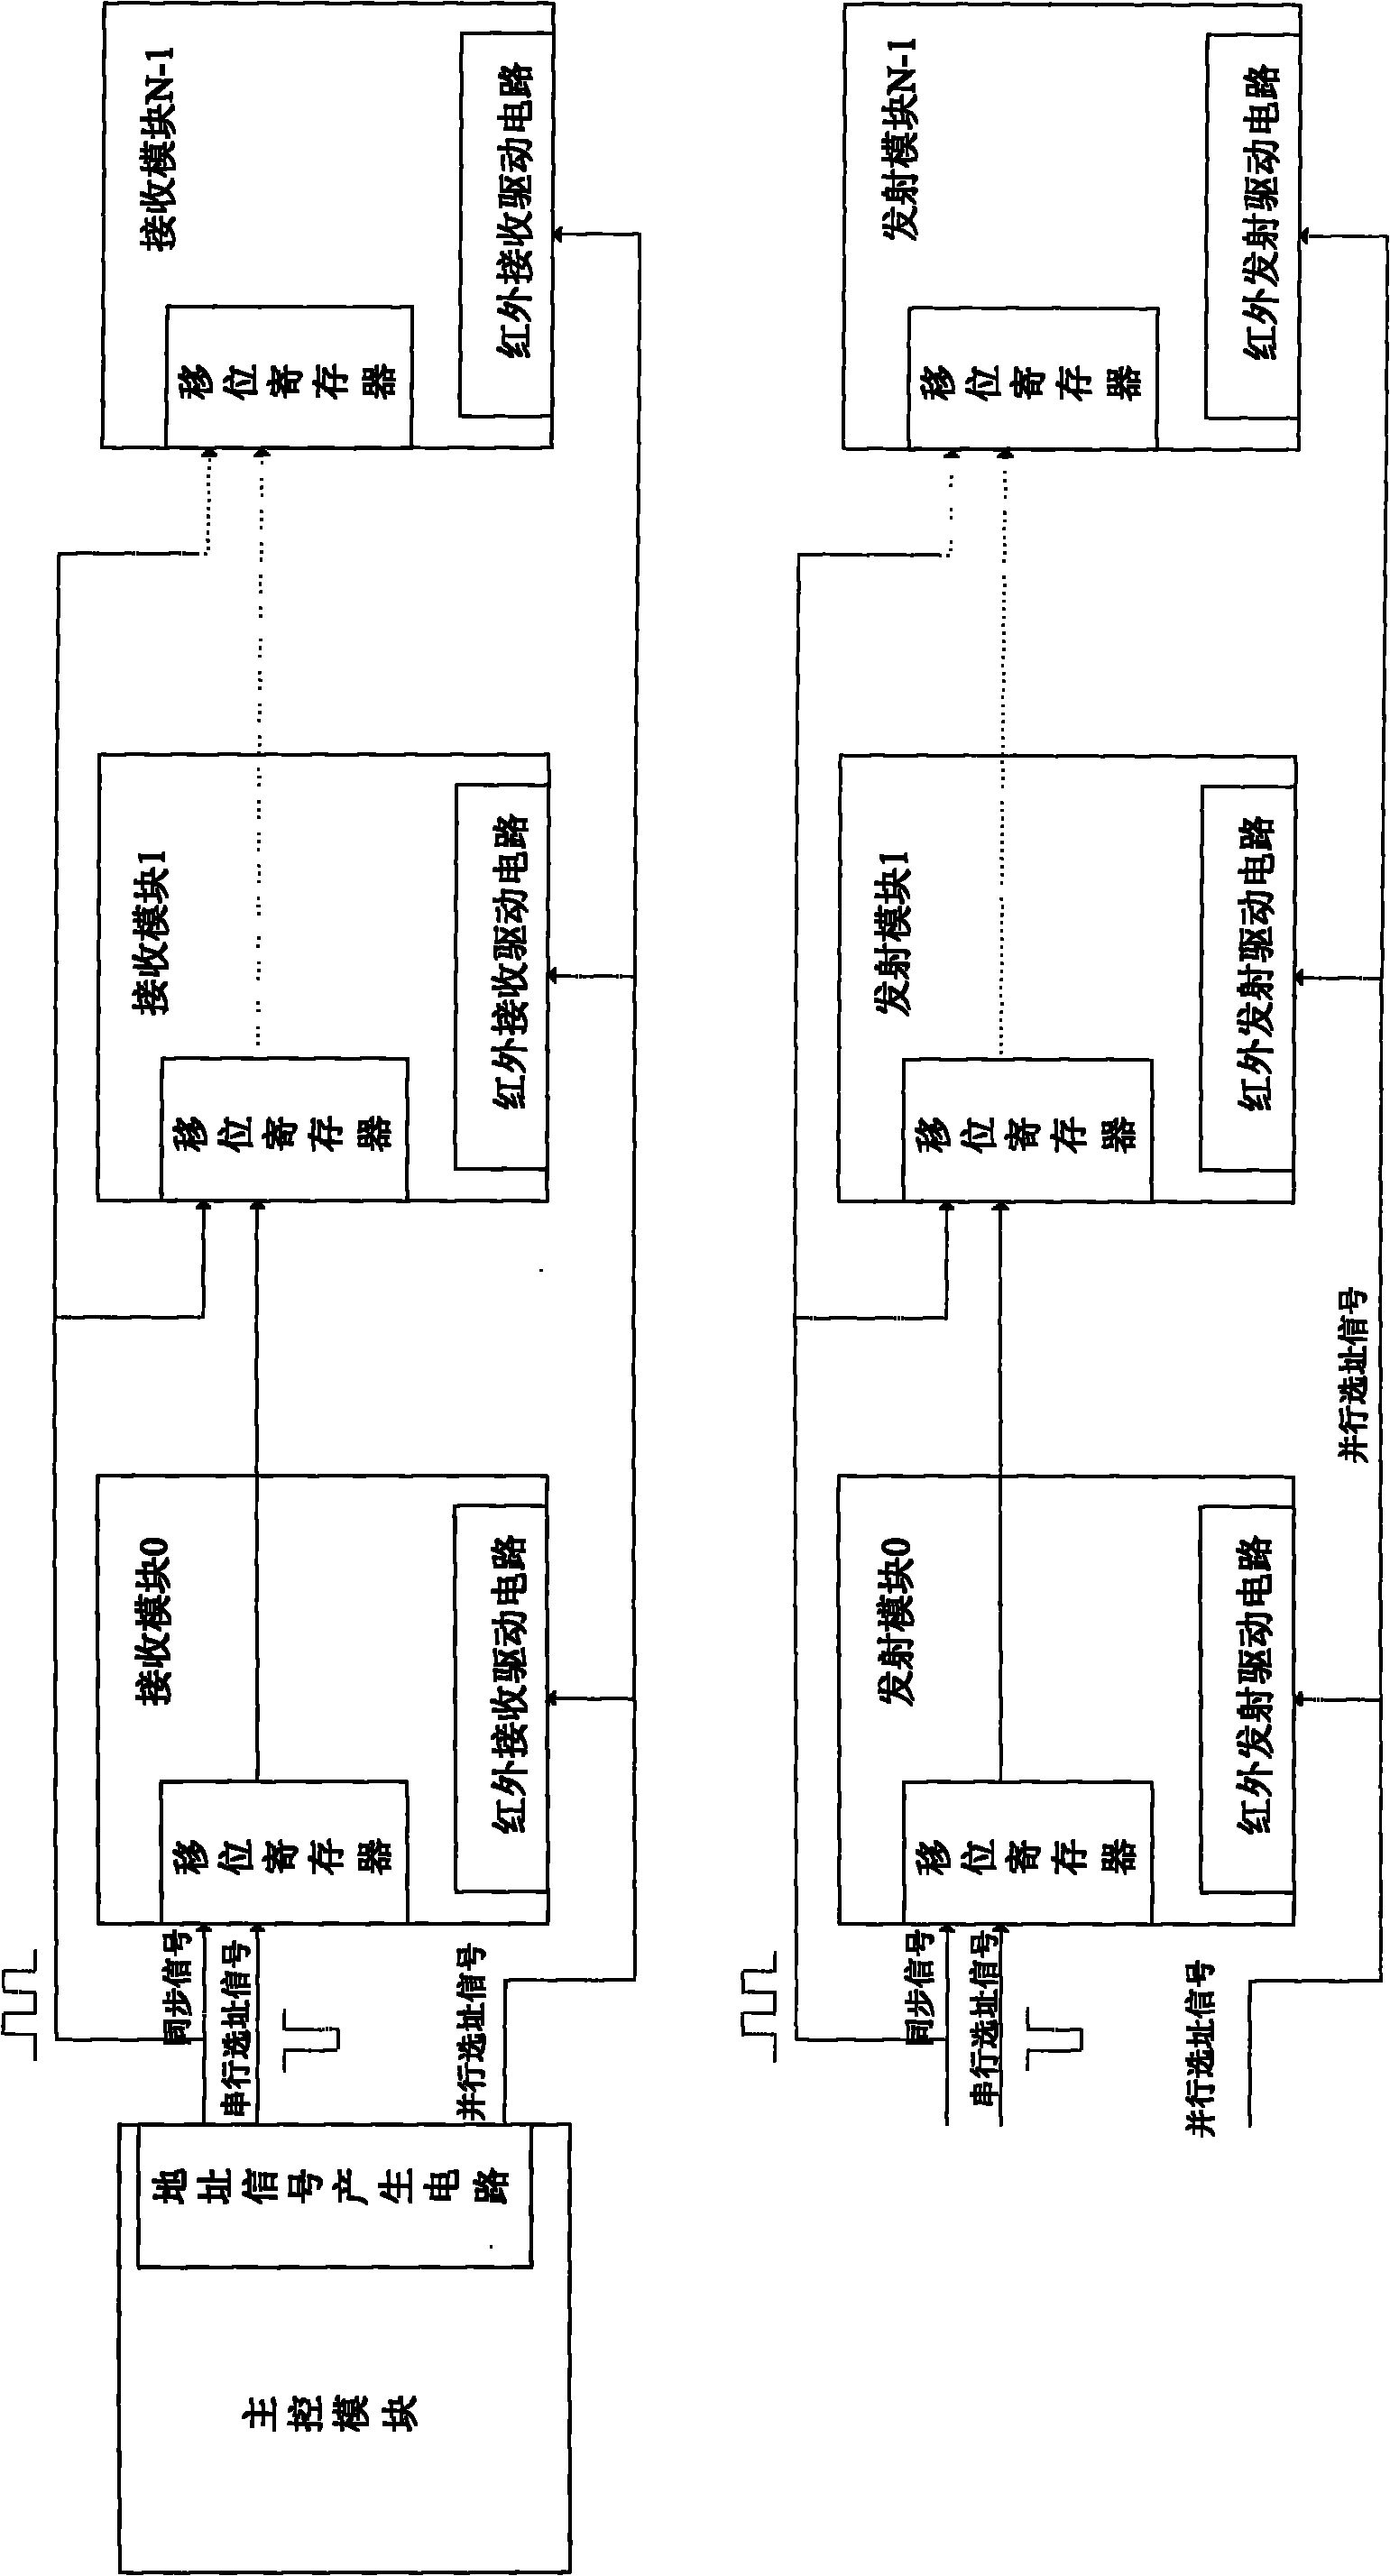 Large-size matrix-scanning-type infrared touch input device